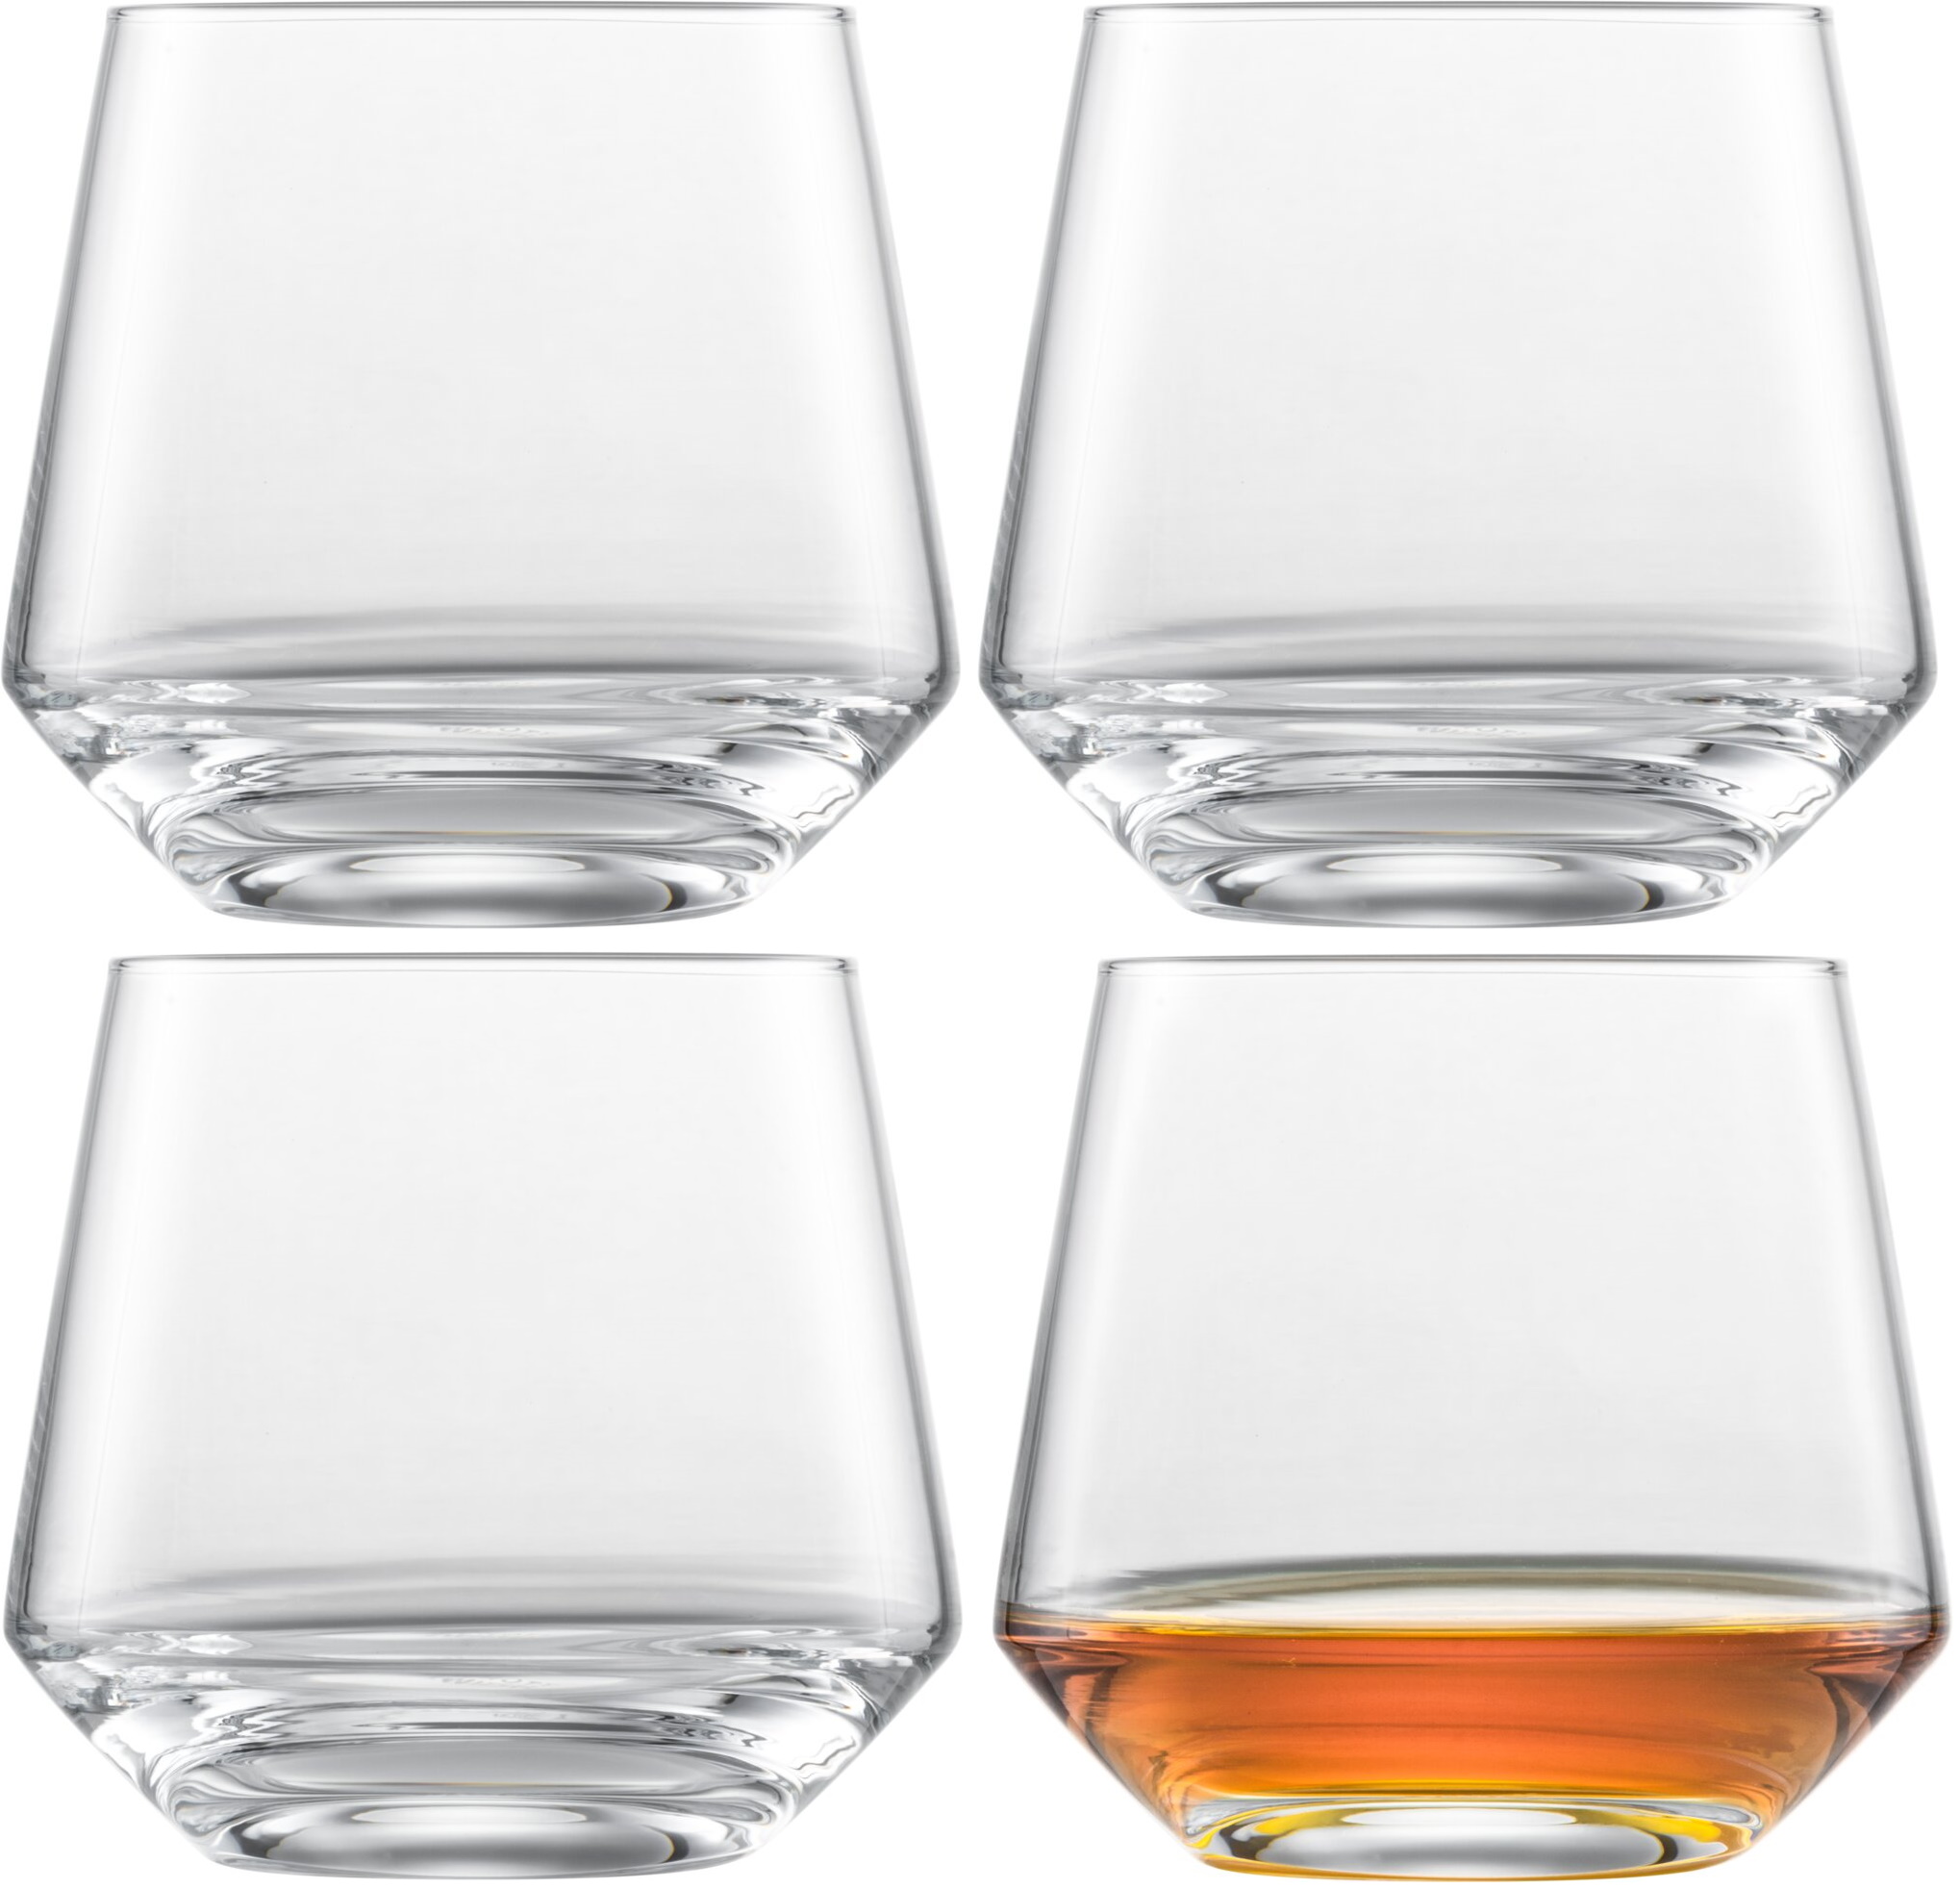 Set 4 pahare whisky Zwiesel Glas Pure Old Fashioned 389ml sensodays pret redus imagine 2022